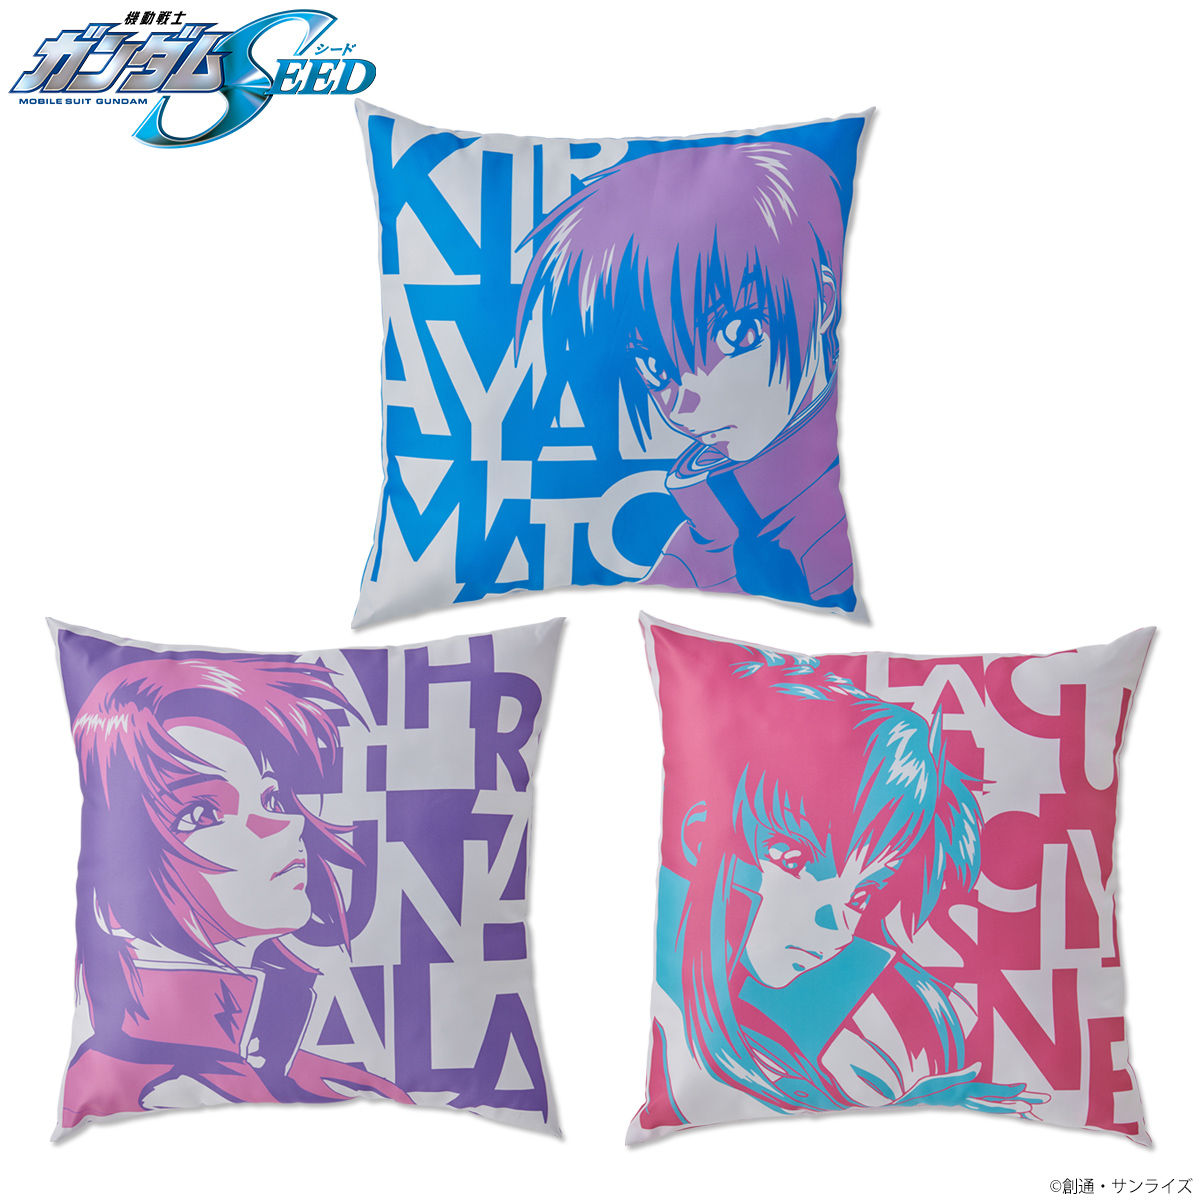 Mobile Suit Gundam SEED Tricolor-themed Pillow